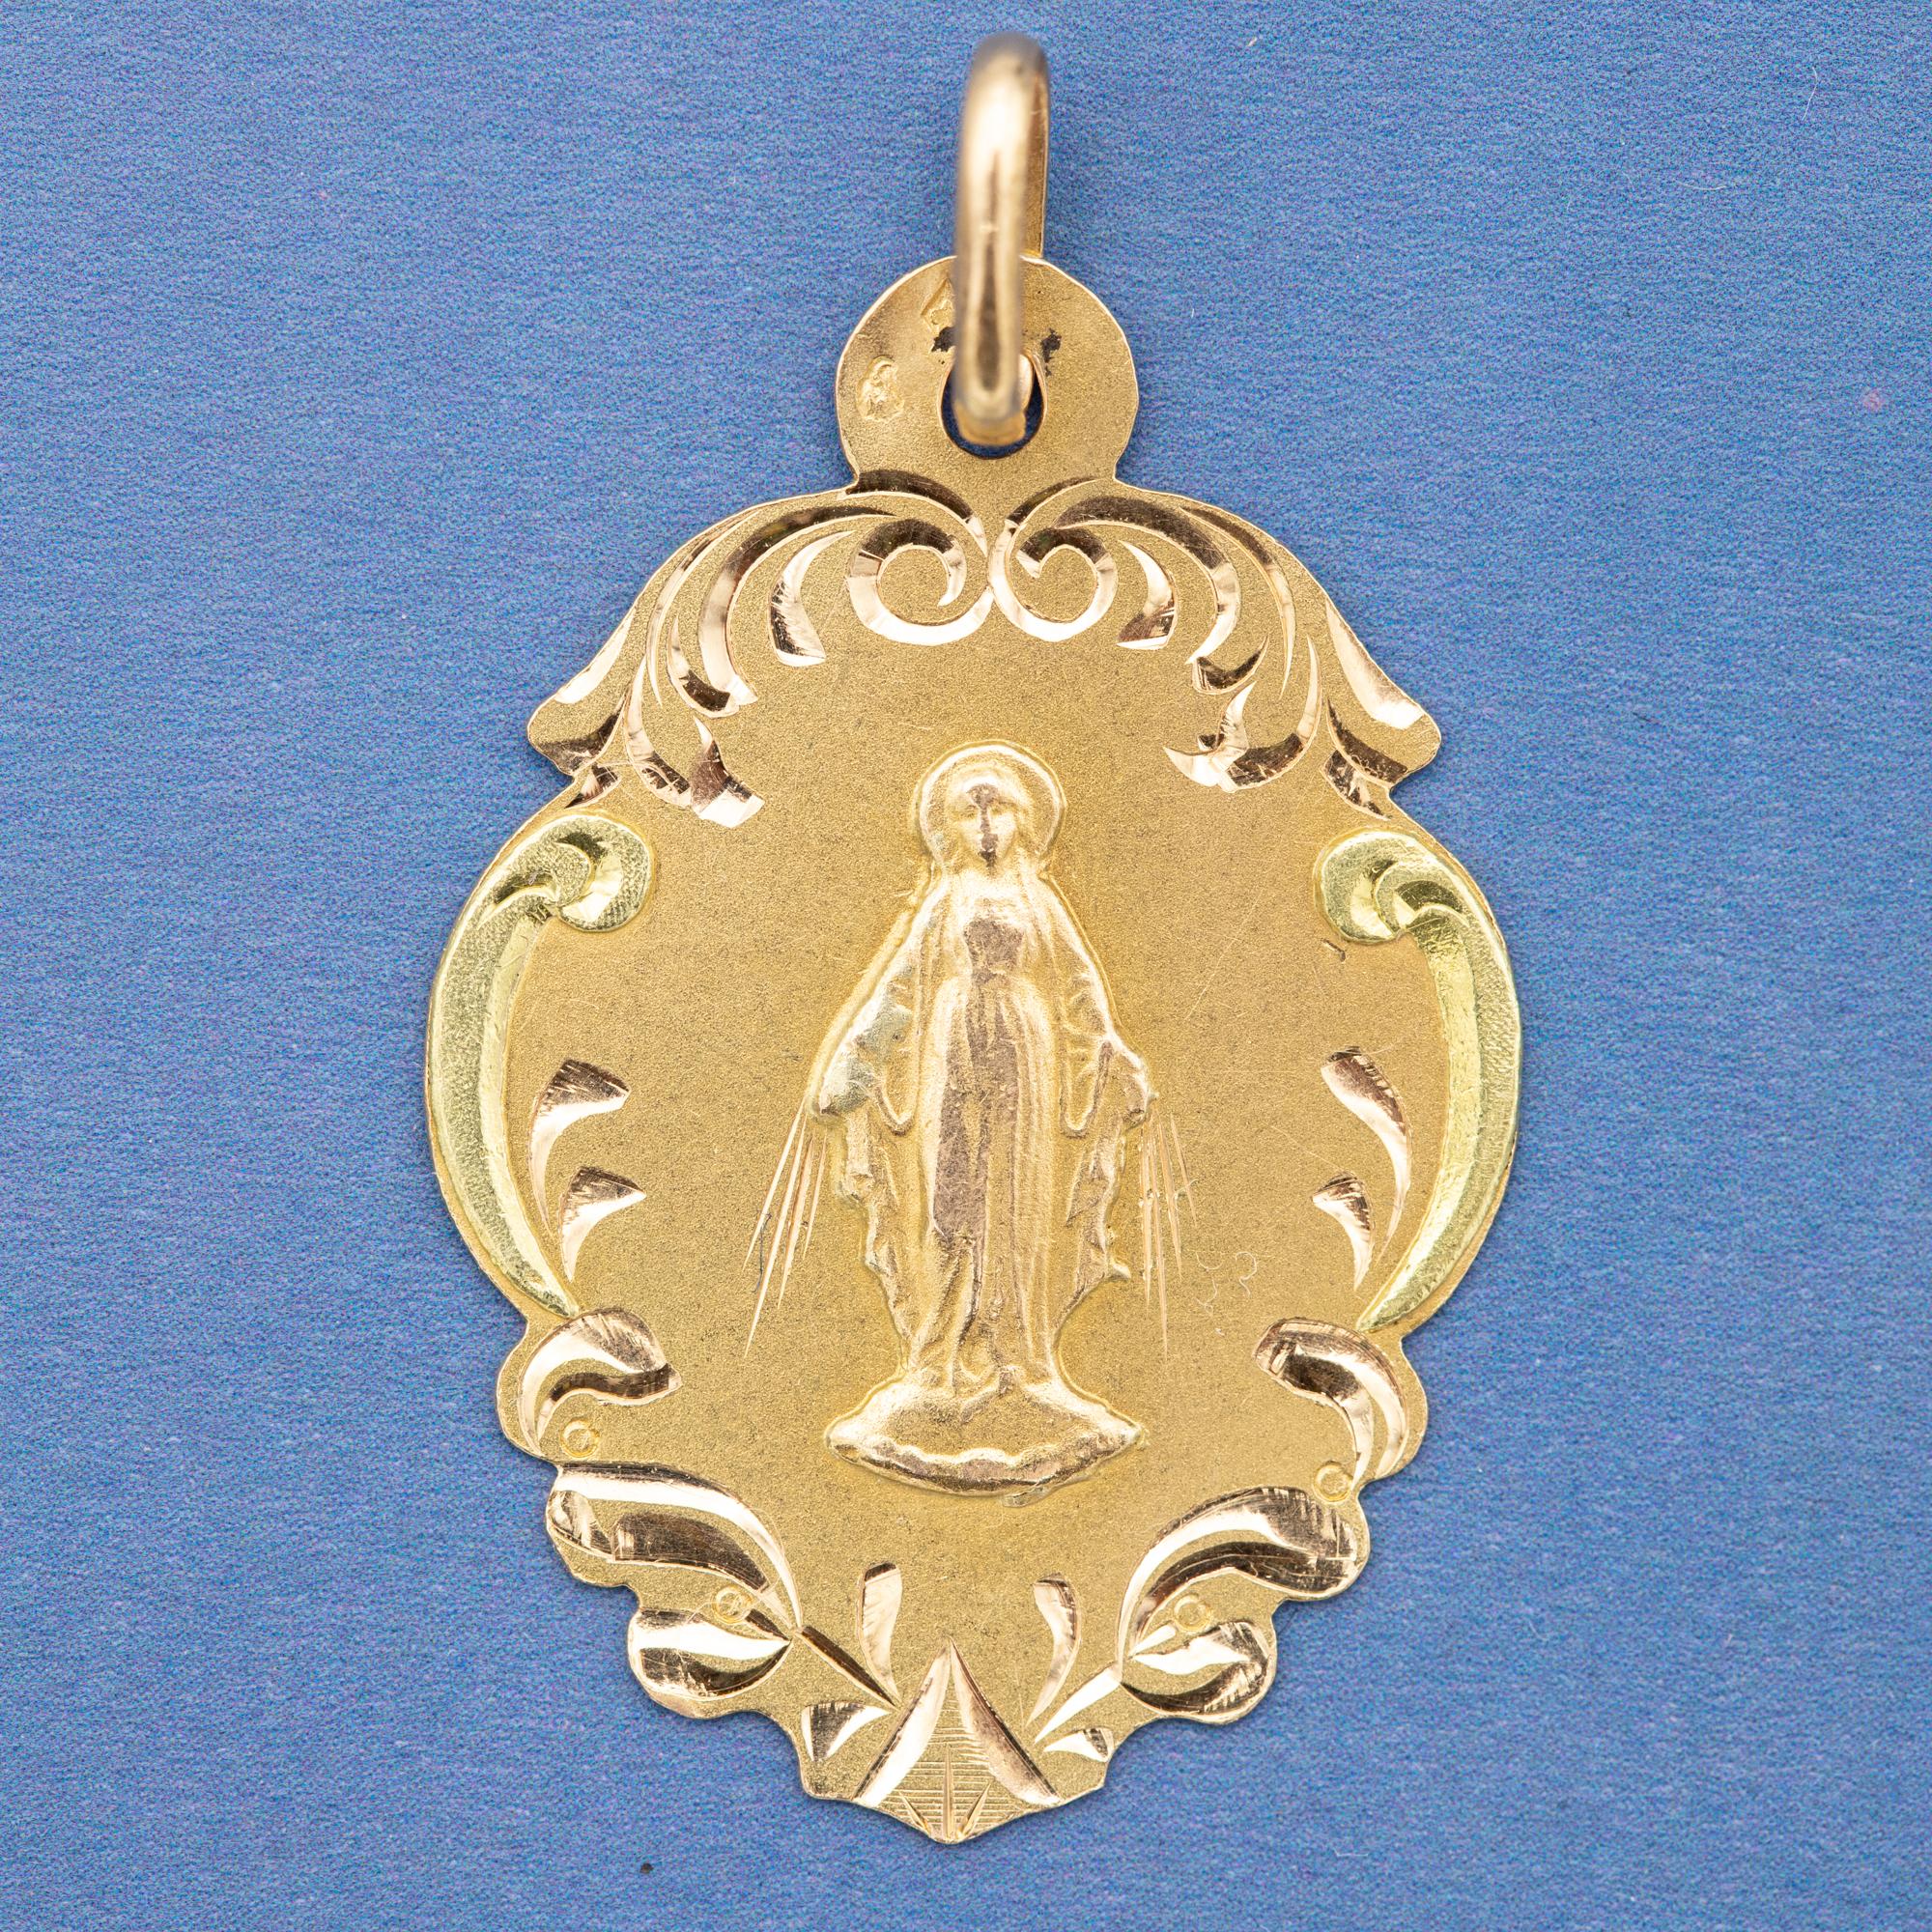 For sale is this stunning mother Mary charm. This lovely charm depicts a well detailled virgin Mary flanked by greenish leafs. This Antique pendant has a floral and warm look thanks to the foliate decoration encircling this religious scene. The